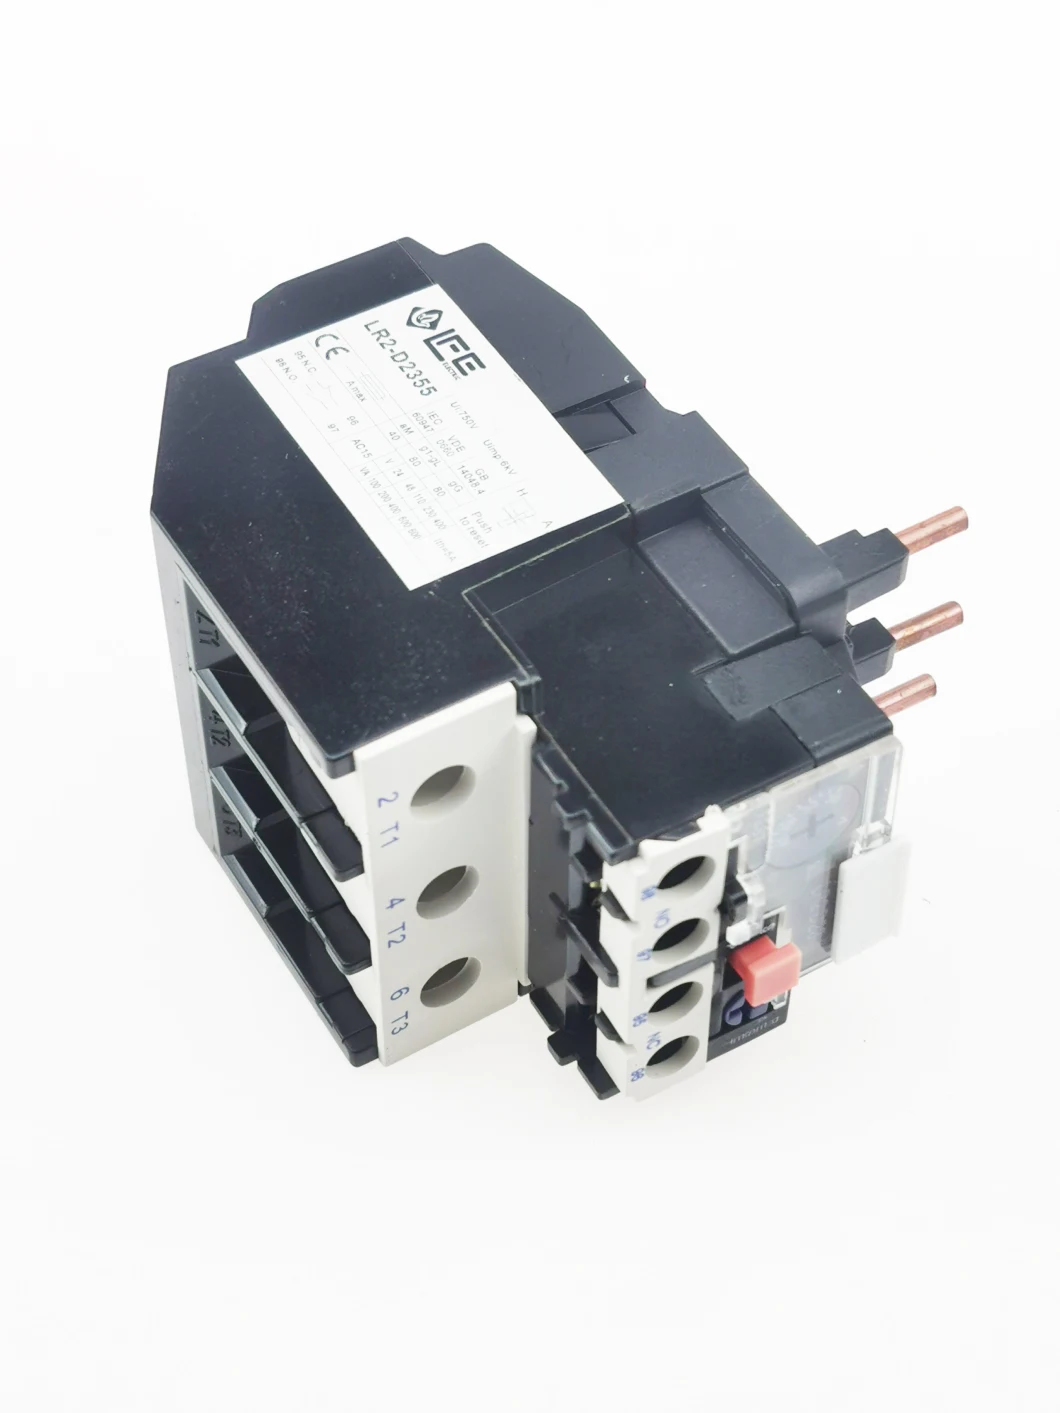 Lr2-D23 Thermal Overload Relay, ISO9001 Passed High Quality Thermal Relay, CE Proved Thermal Overload Irelay